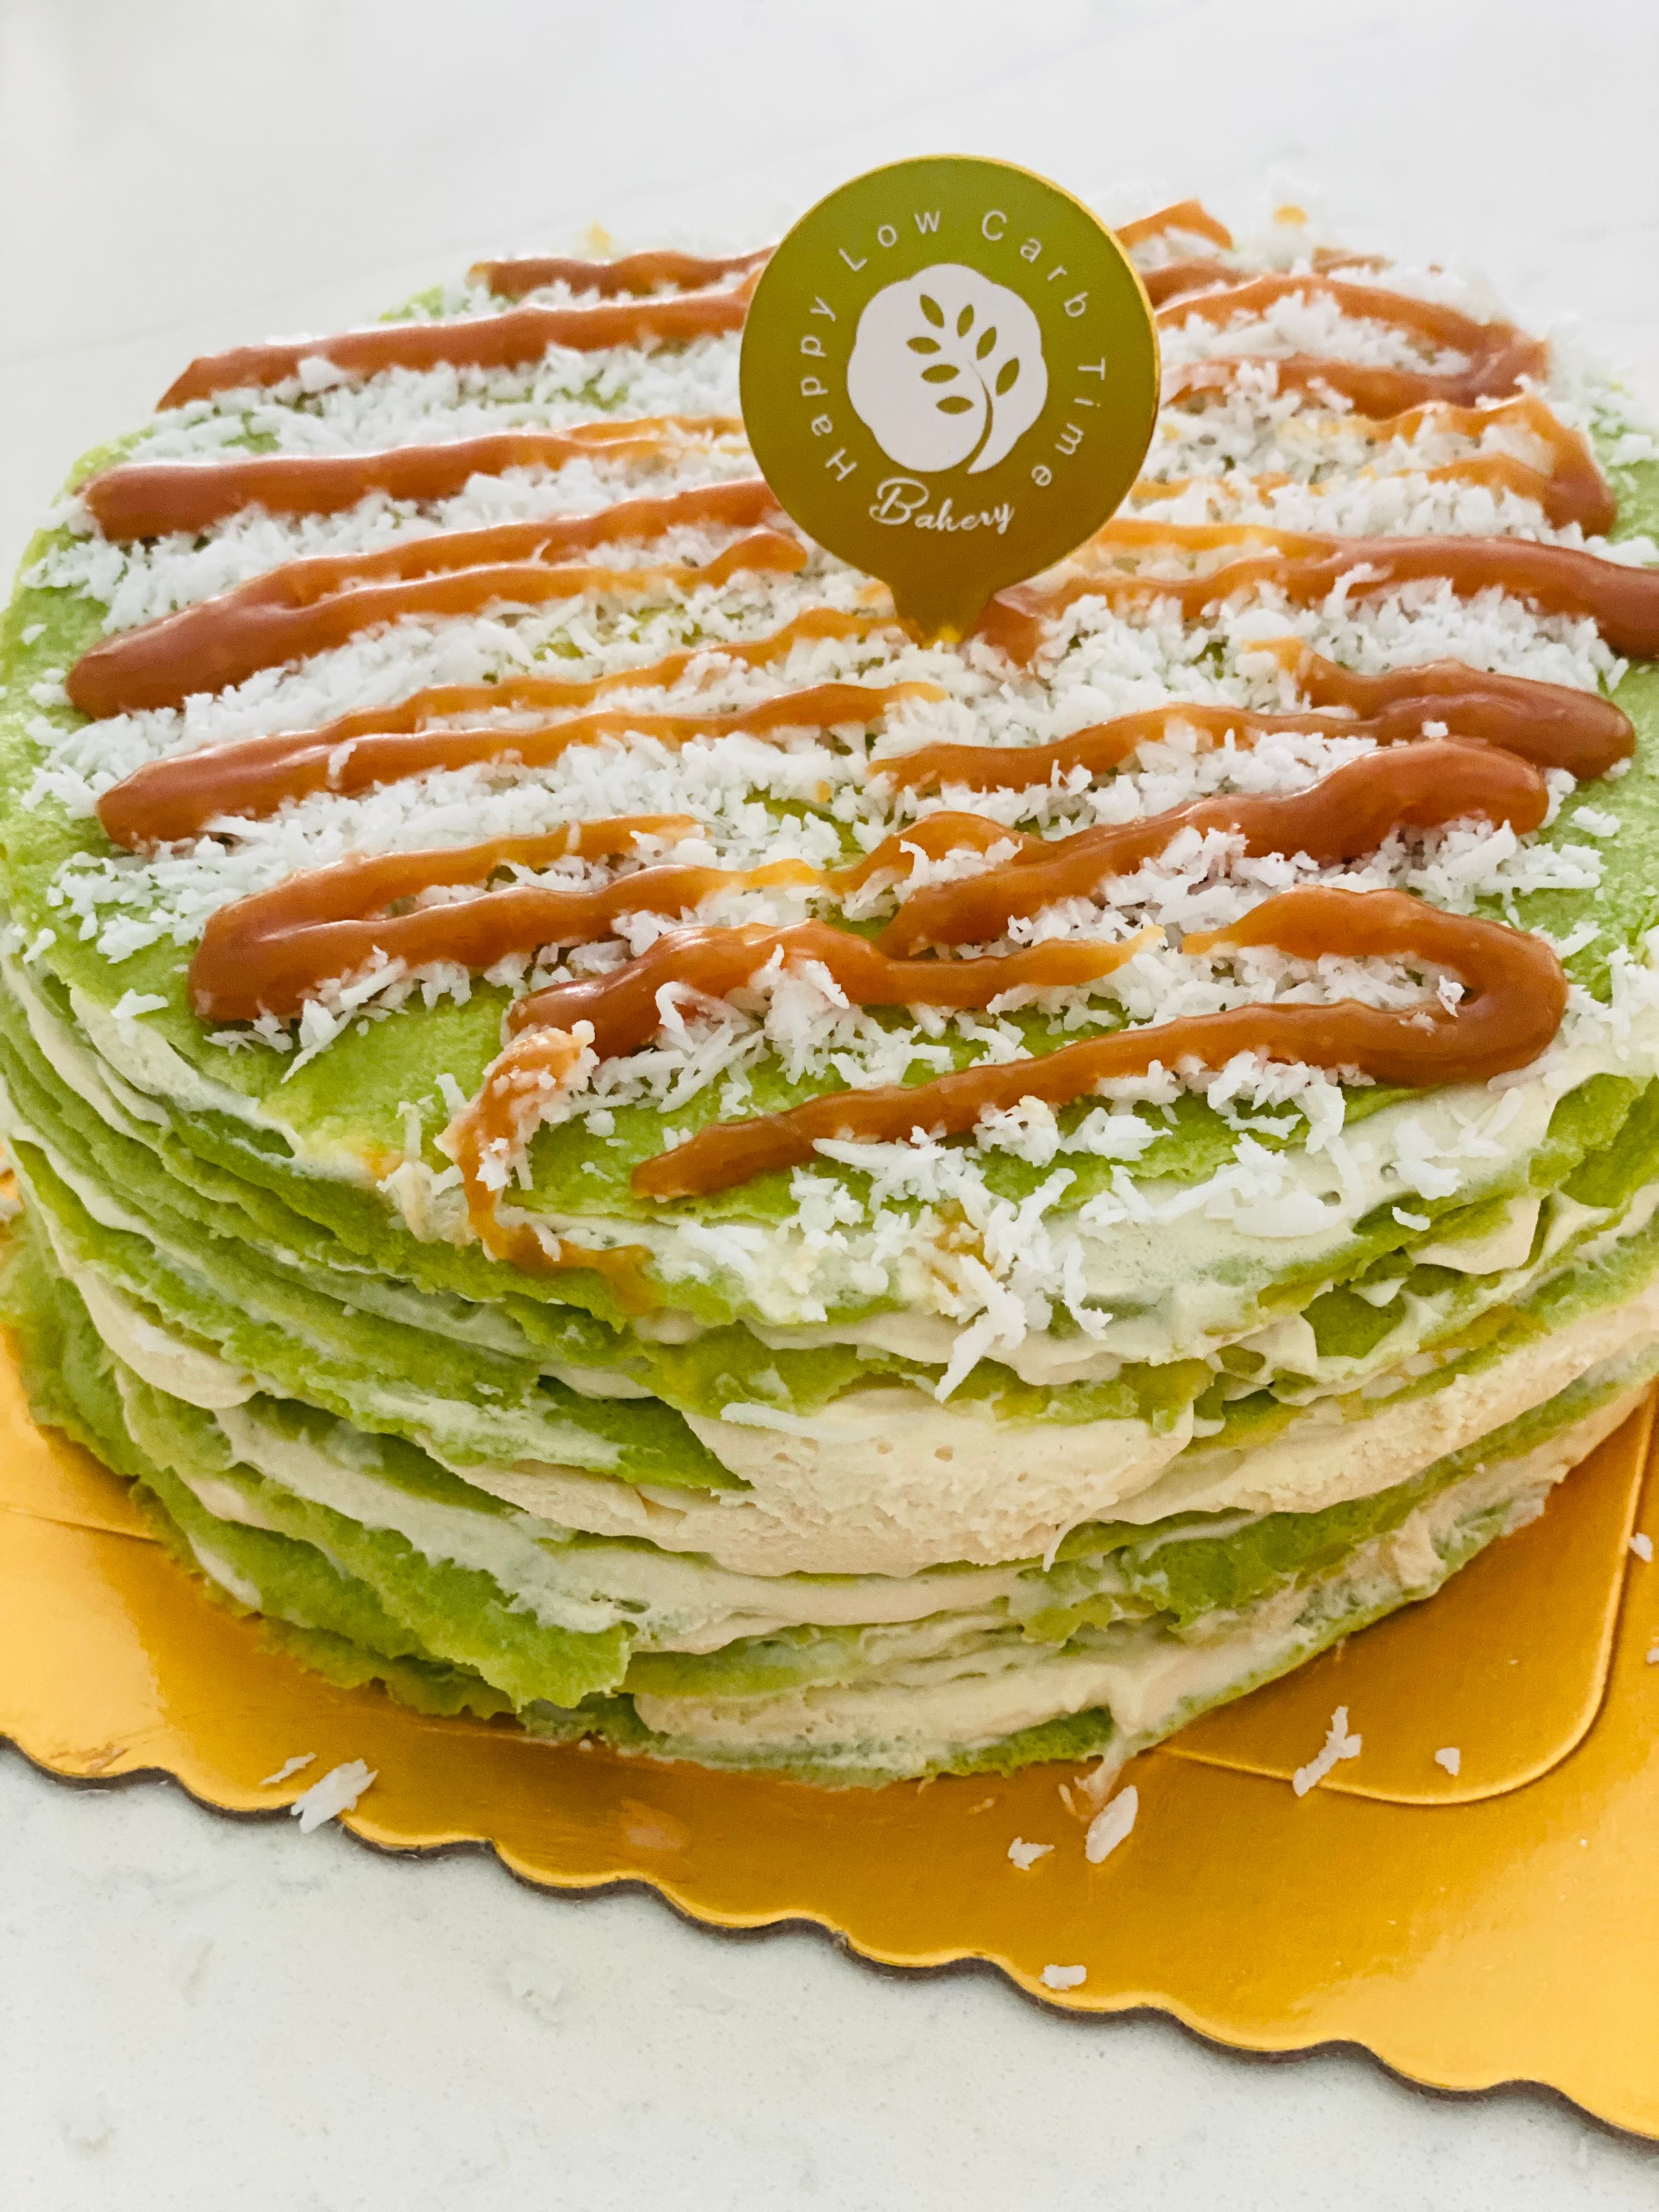 (New!) Ondeh Ondeh Mille Crepe Cake 6”